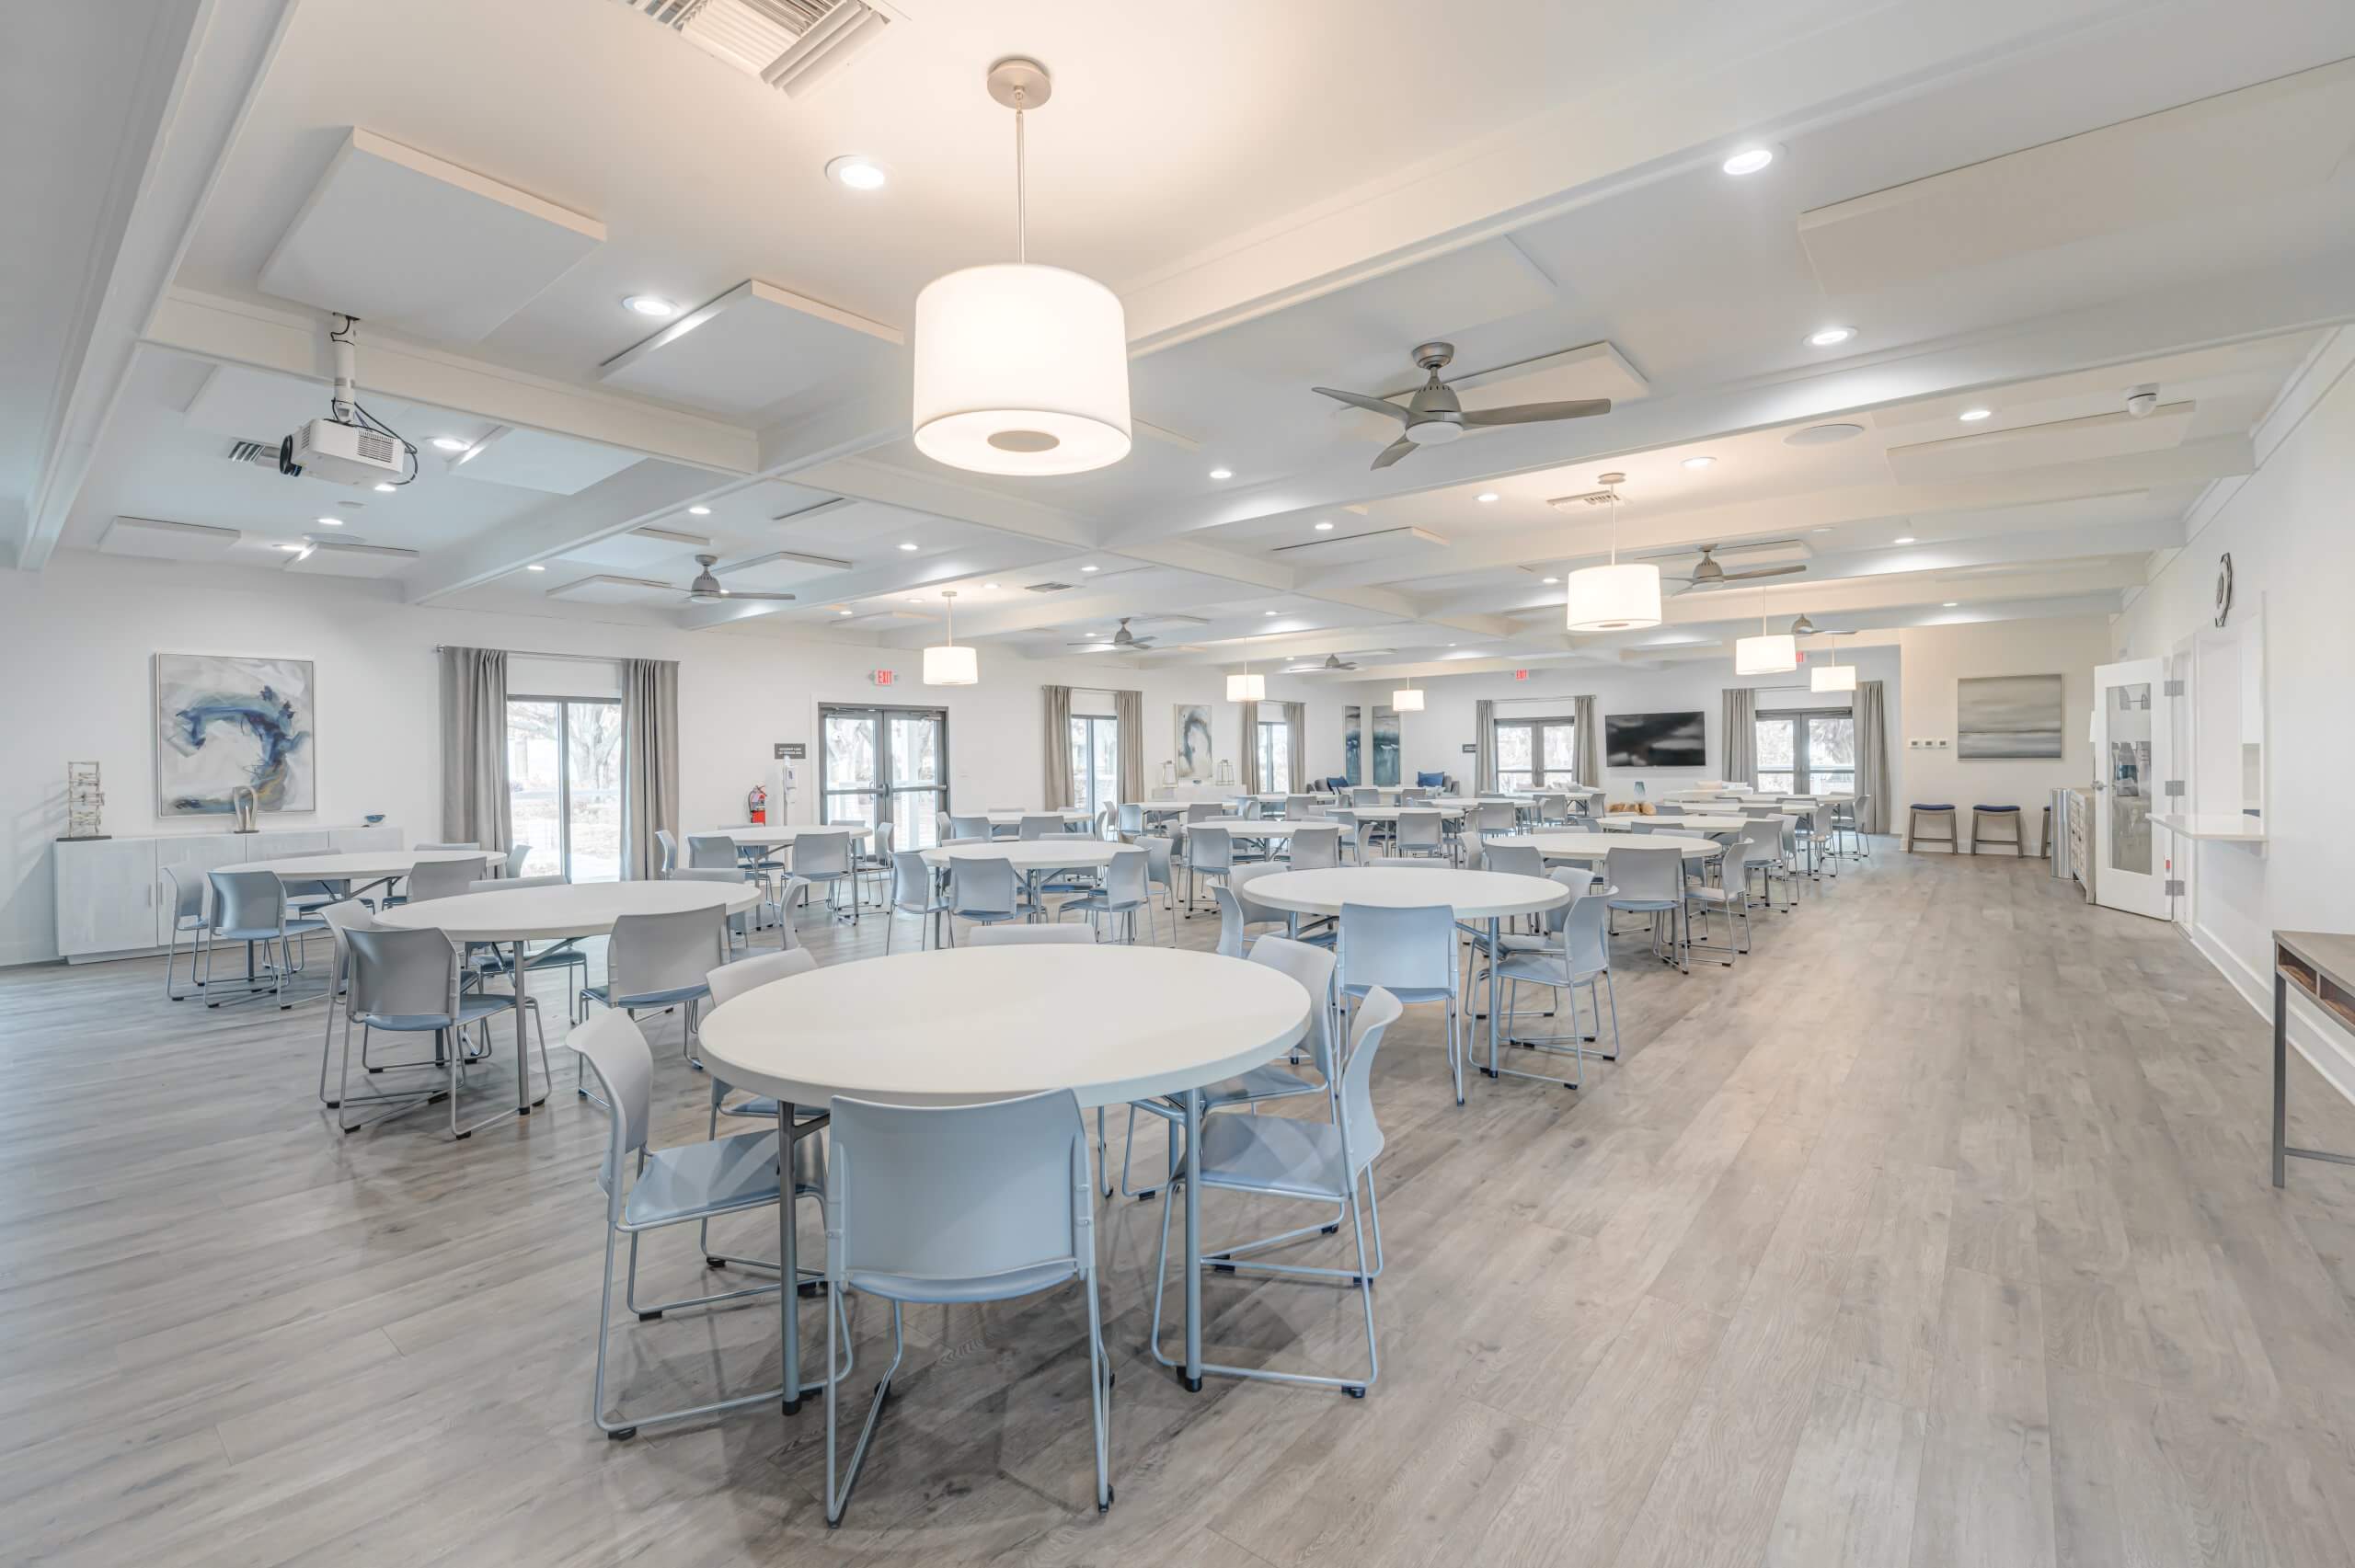 An expansive, modern dining and meeting hall with multiple round tables and chairs, large windows, and abstract wall art, complemented by high ceilings with stylish light fixtures.